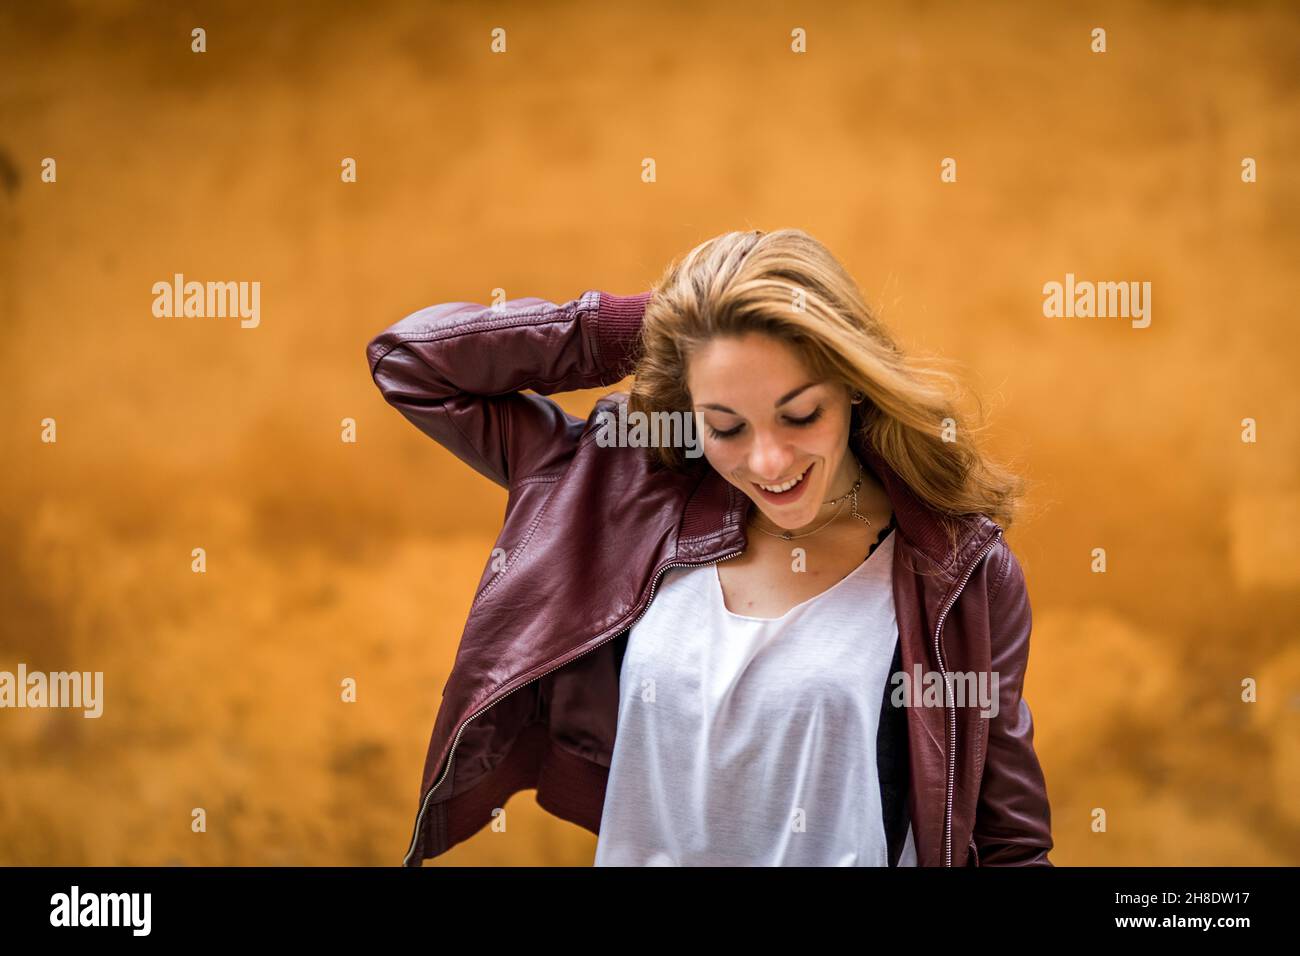 Young and happy girl in casual clothes enjoying on orange background close up Stock Photo